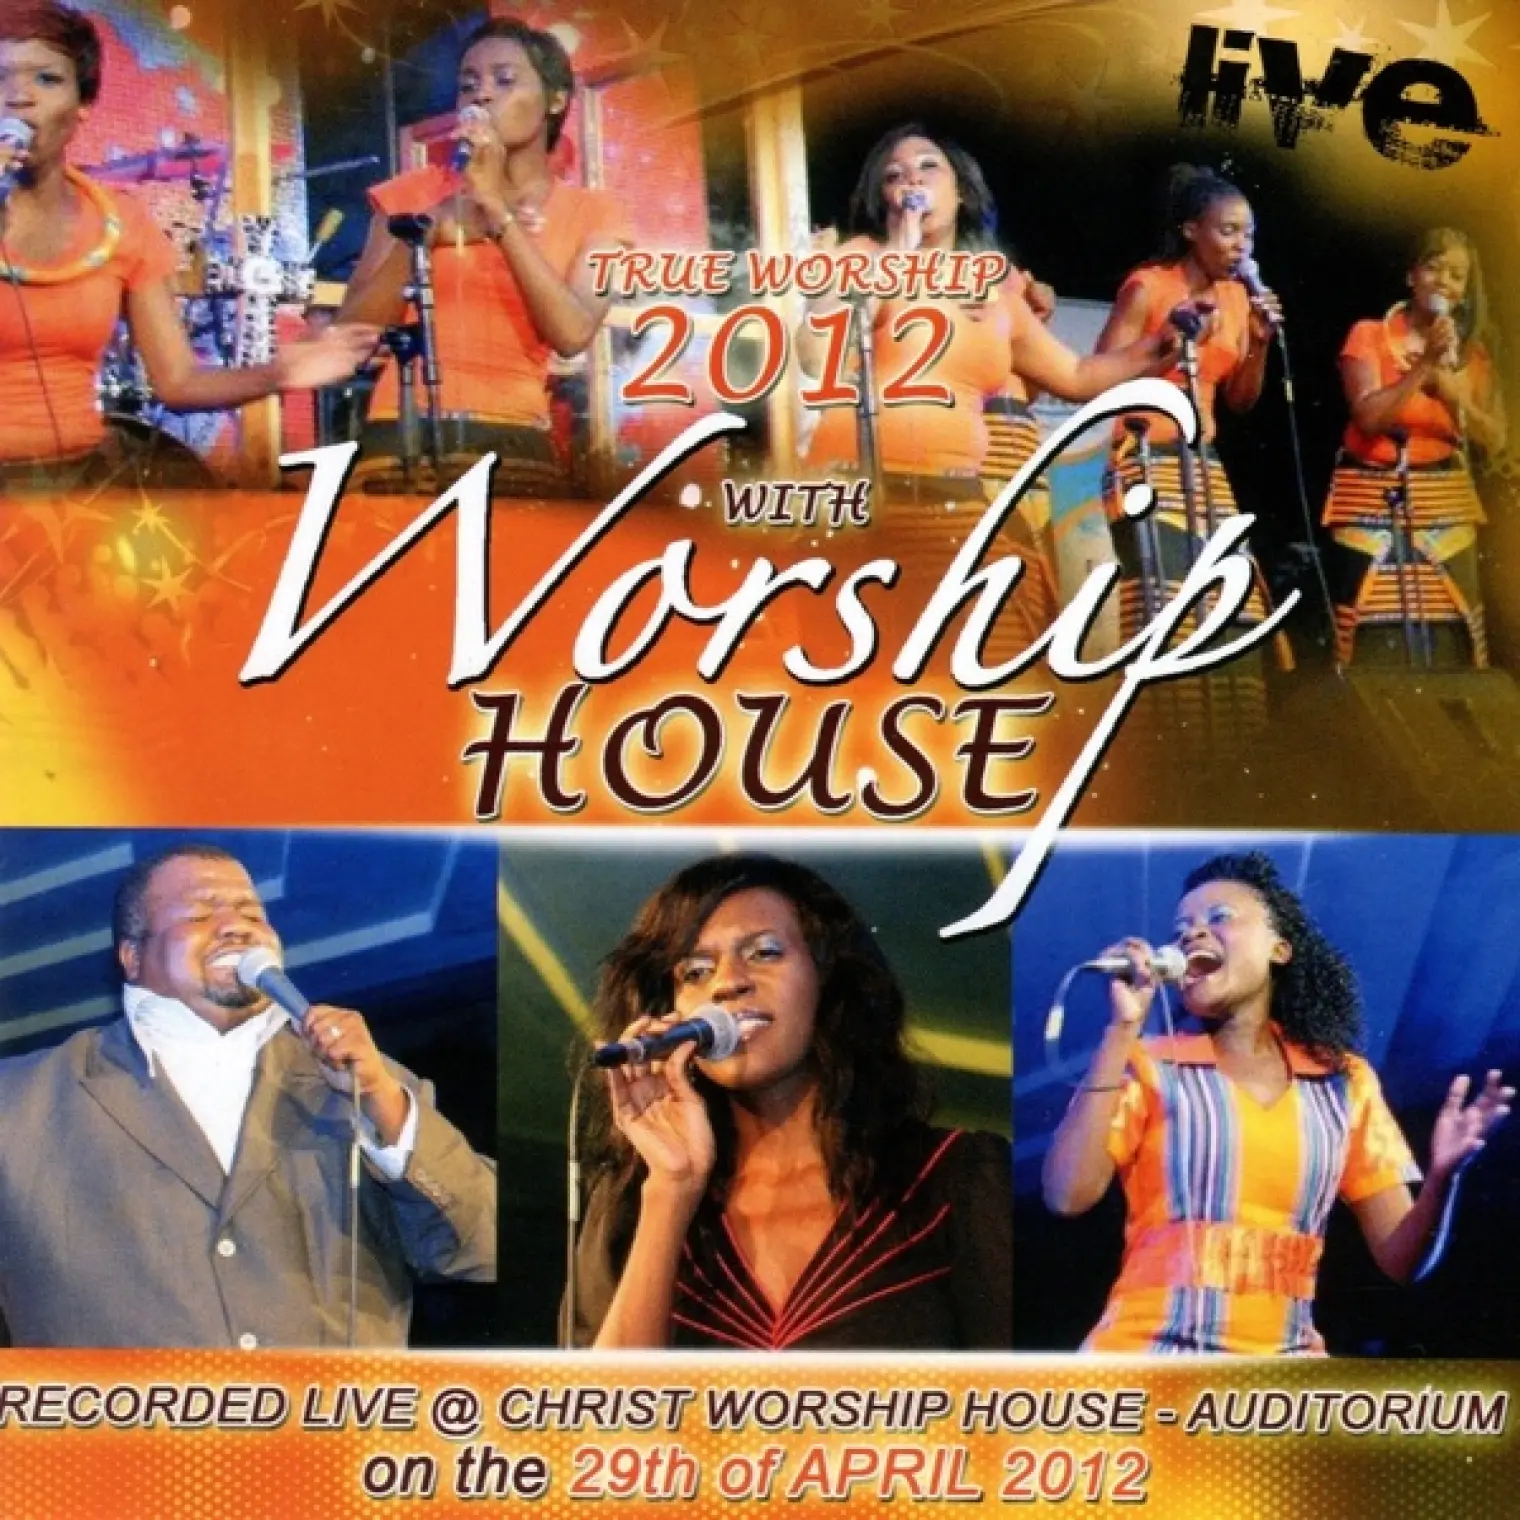 True Worship 2012: Recorded Live at the Christ Worship House Auditorium -  Worship House 